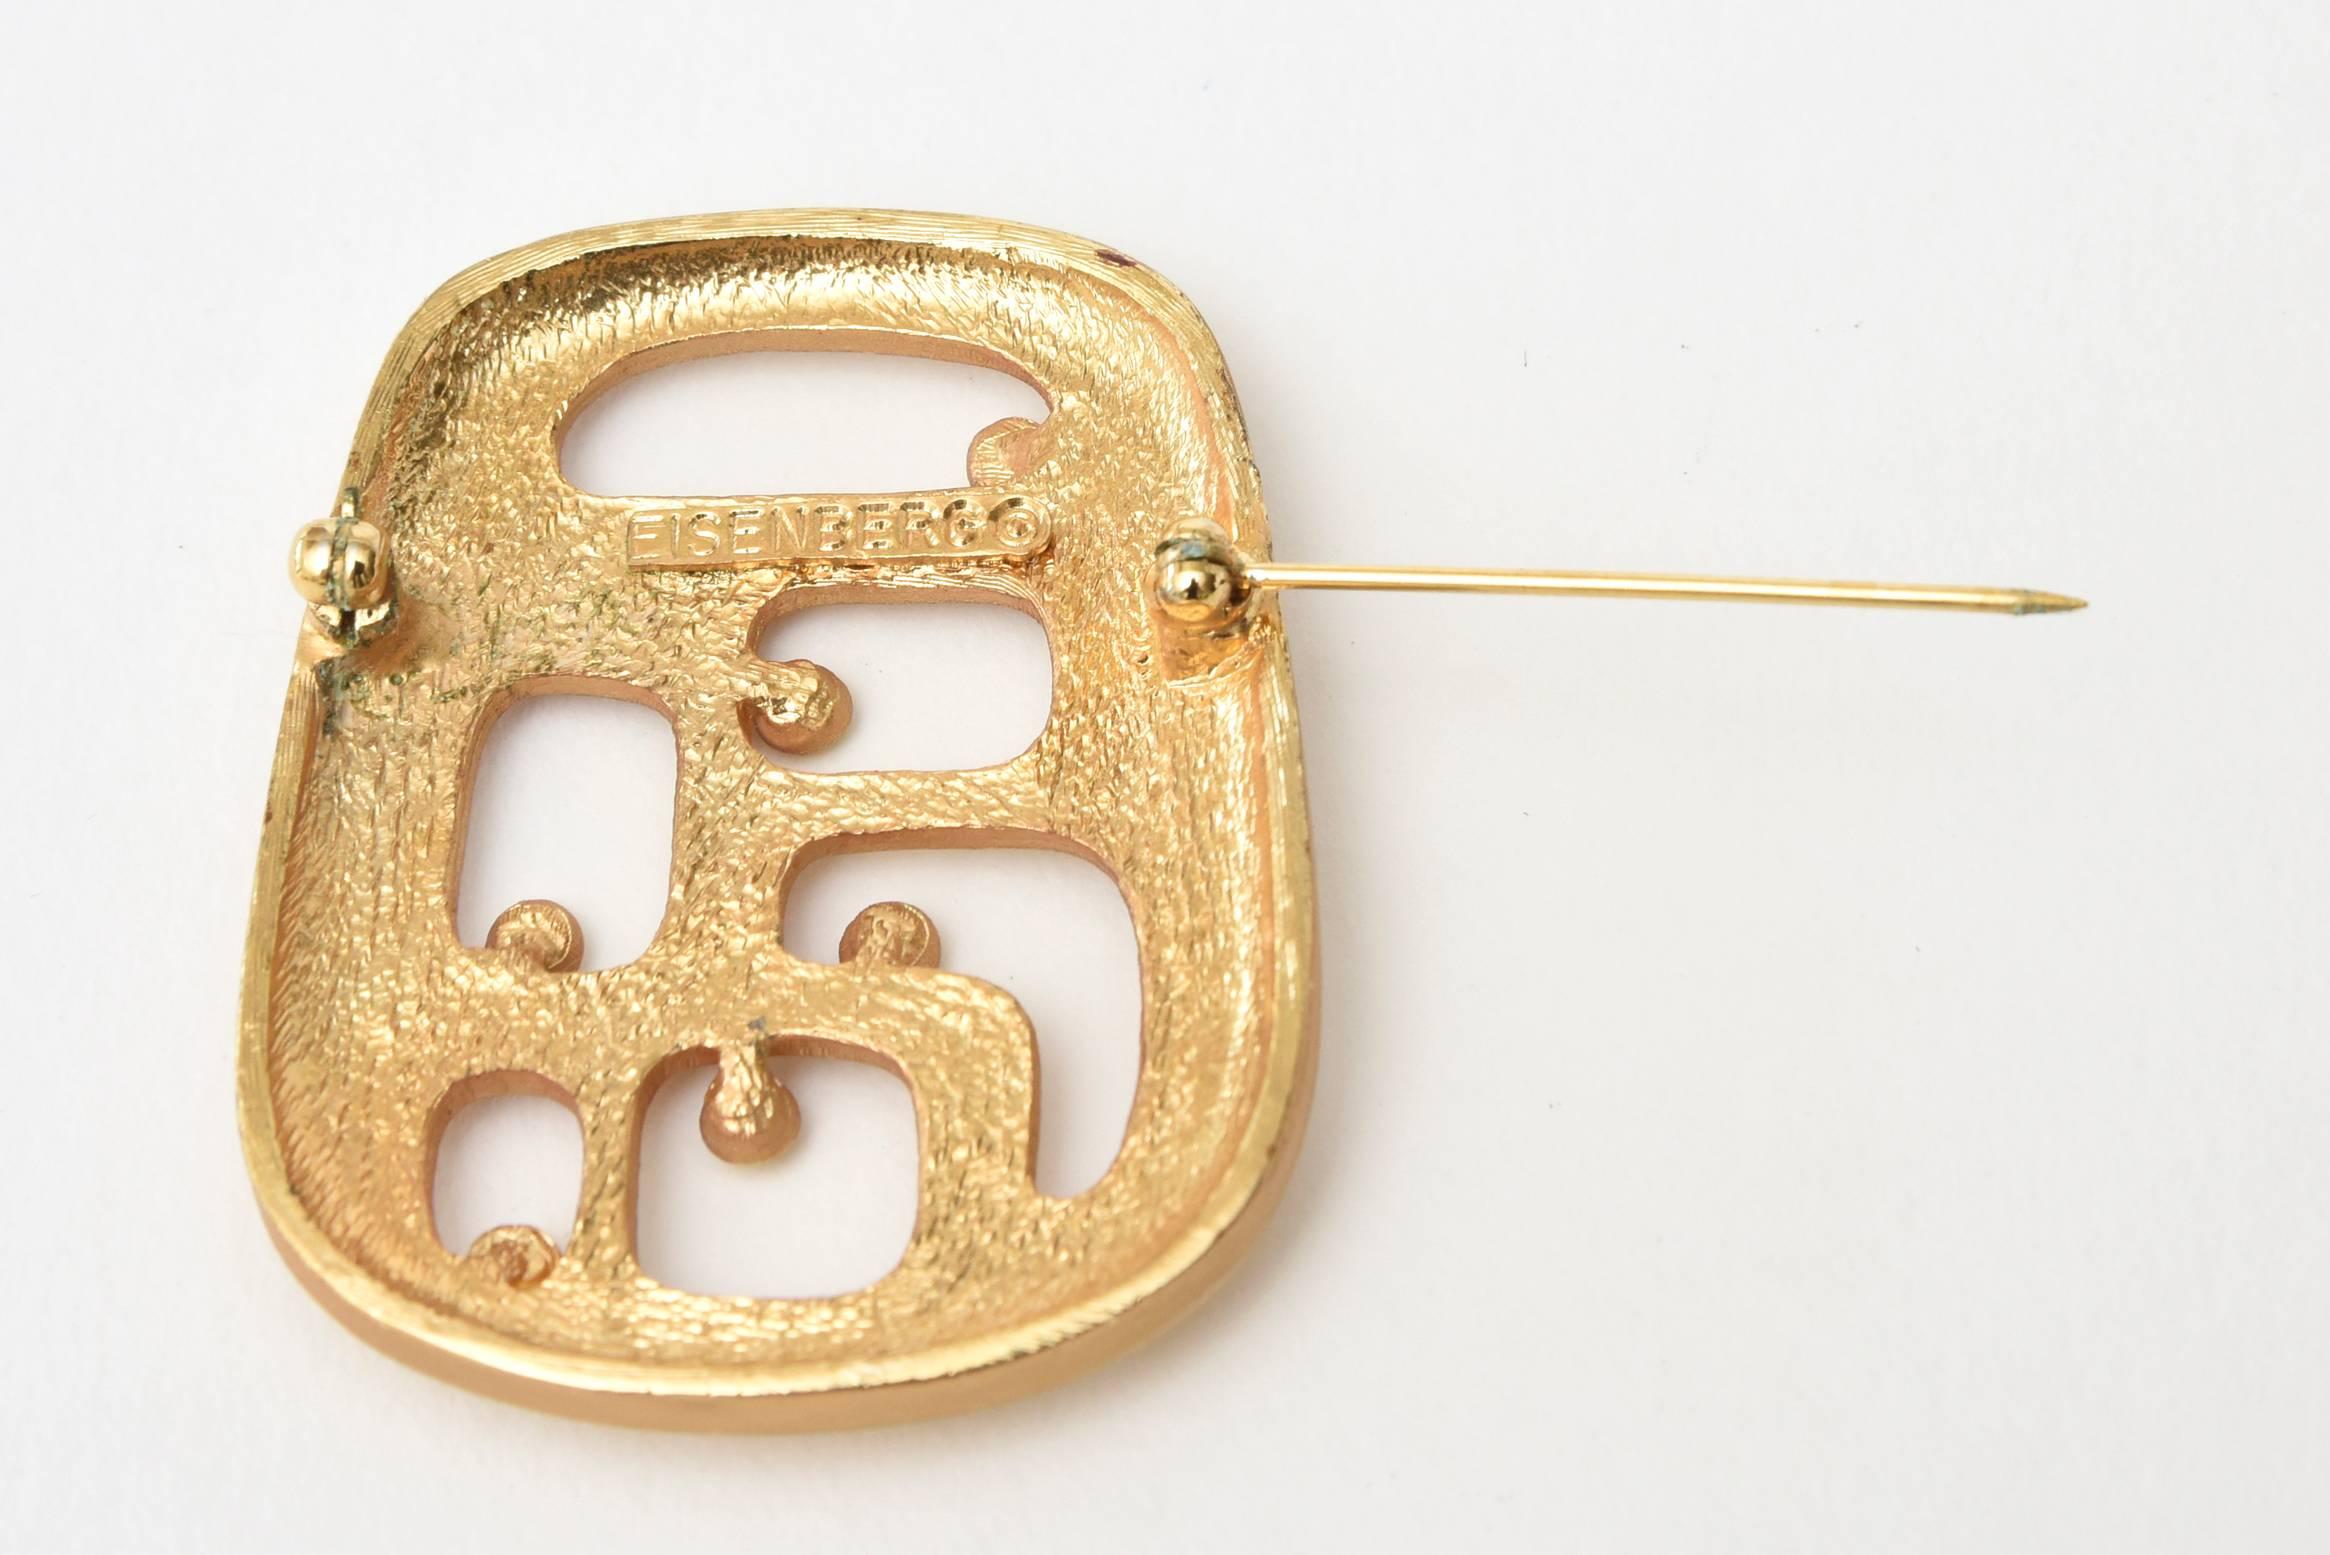 Women's Eisenberg Gold Plated Modernist Abstract Pin Or Brooch For Sale